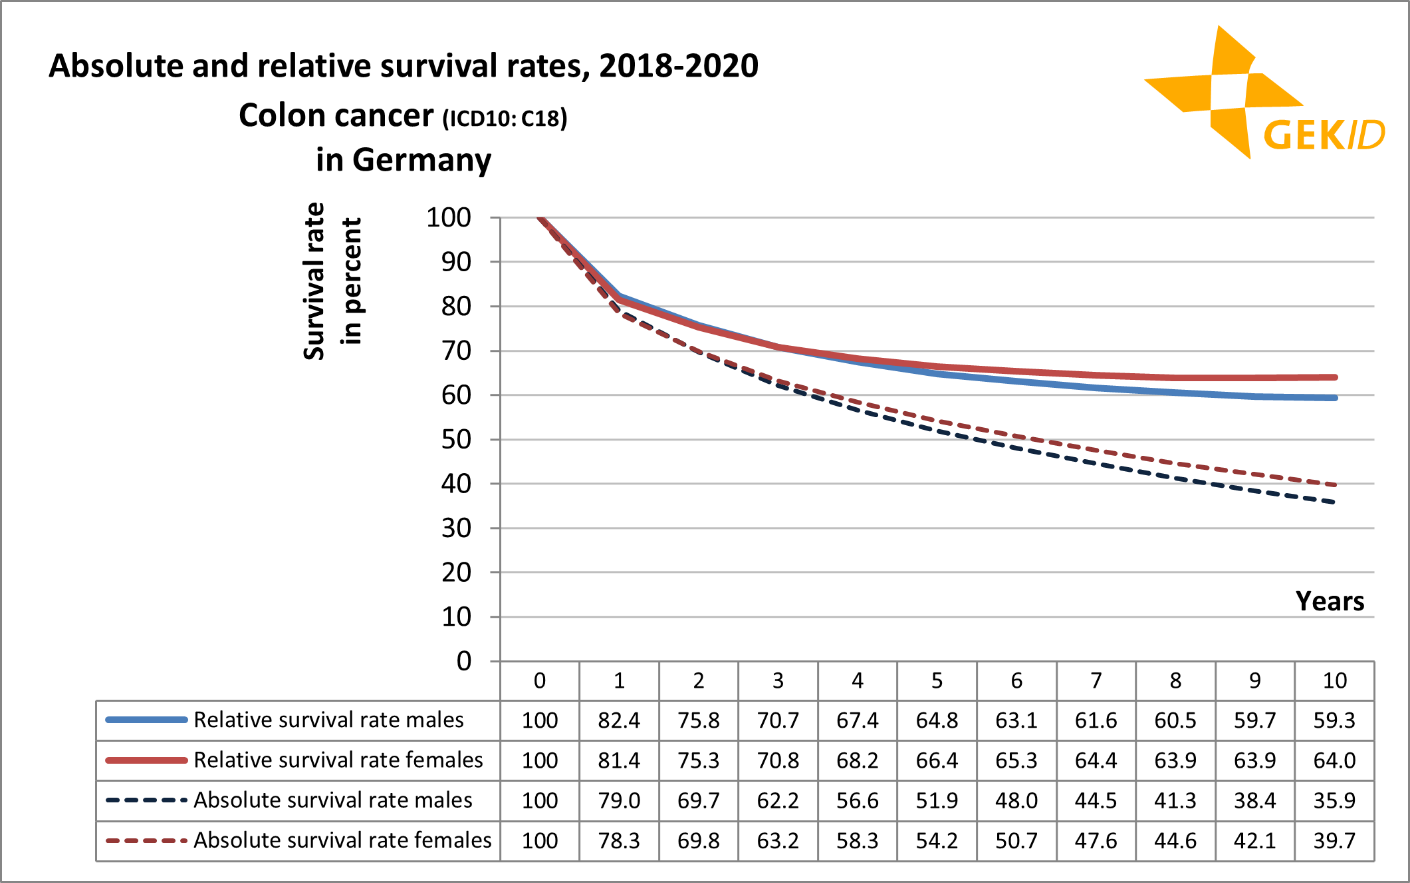 Absolute and relative survival rates for colon cancer (ICD 10: C18)